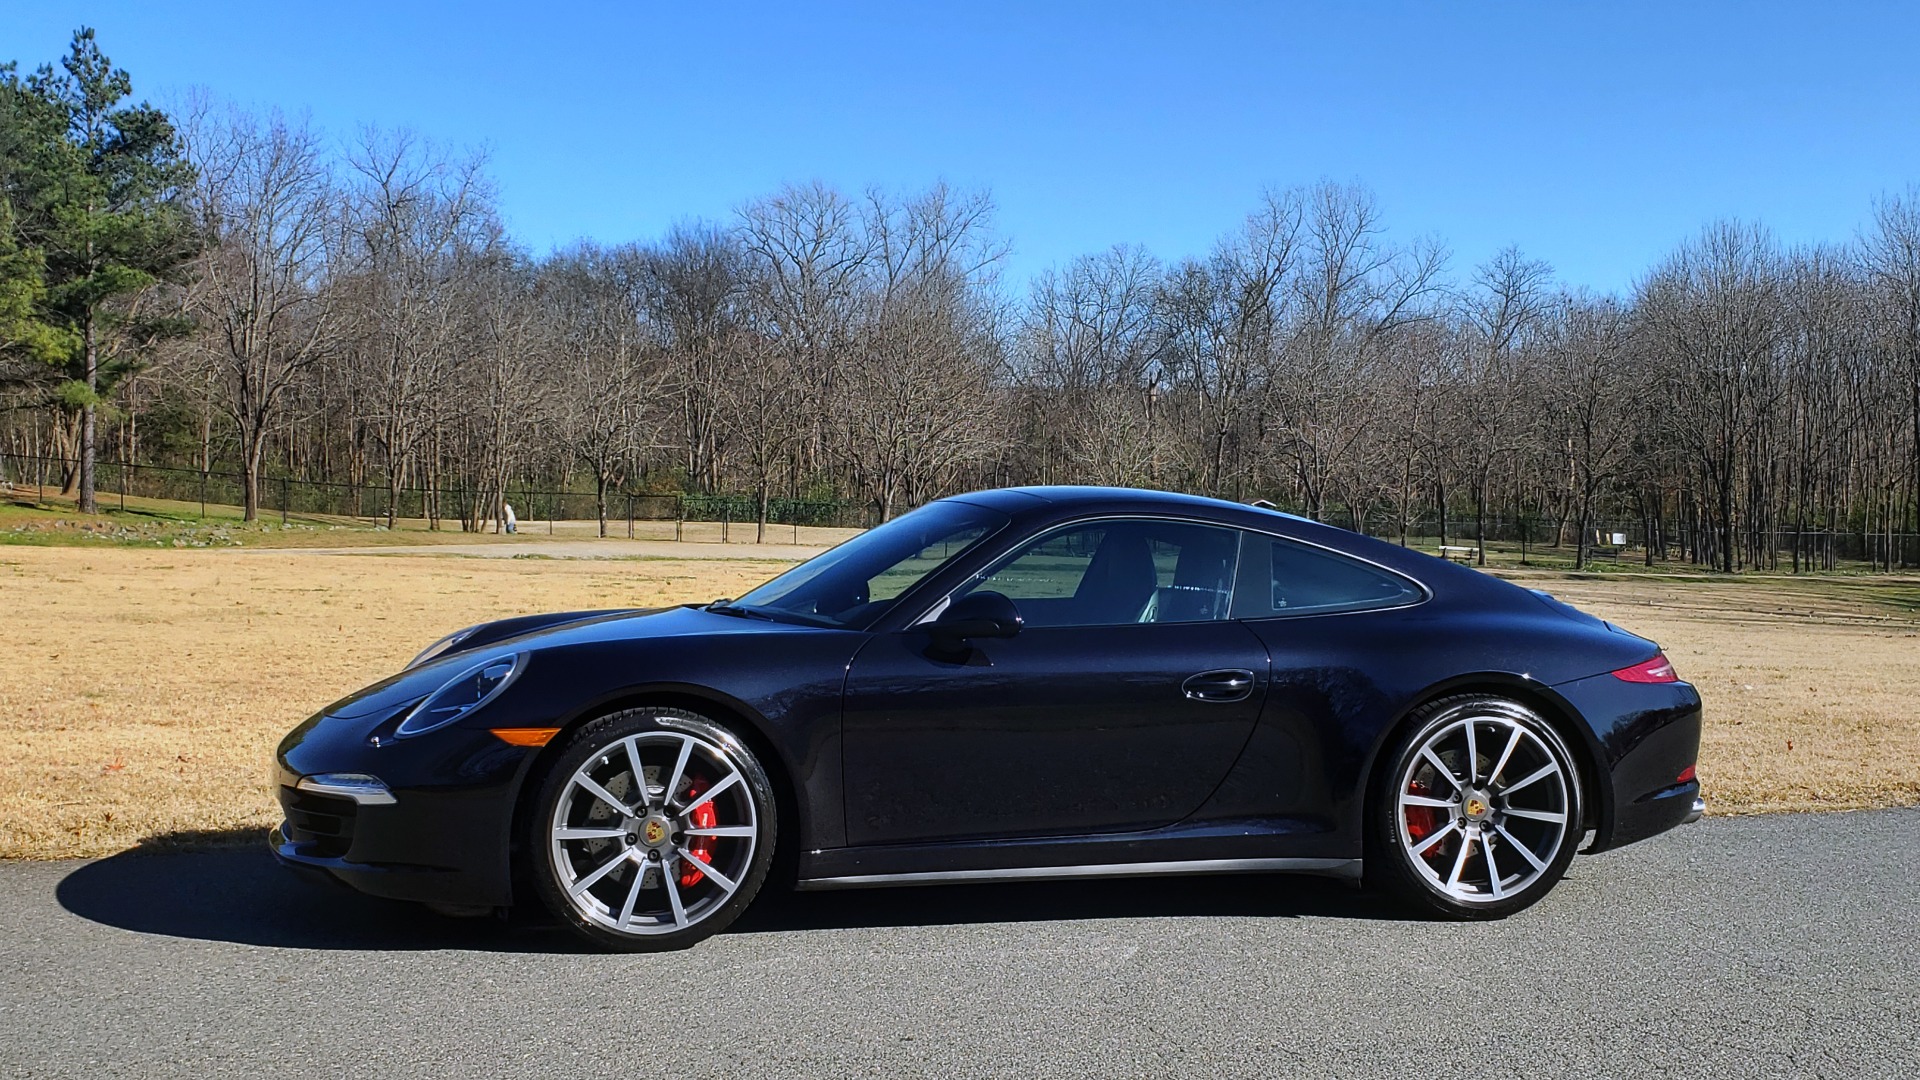 Used 2016 Porsche 911 CARRERA 4S PREM / NAV / CHRONO / BOSE / PDLS / SPORT EXH for sale Sold at Formula Imports in Charlotte NC 28227 5